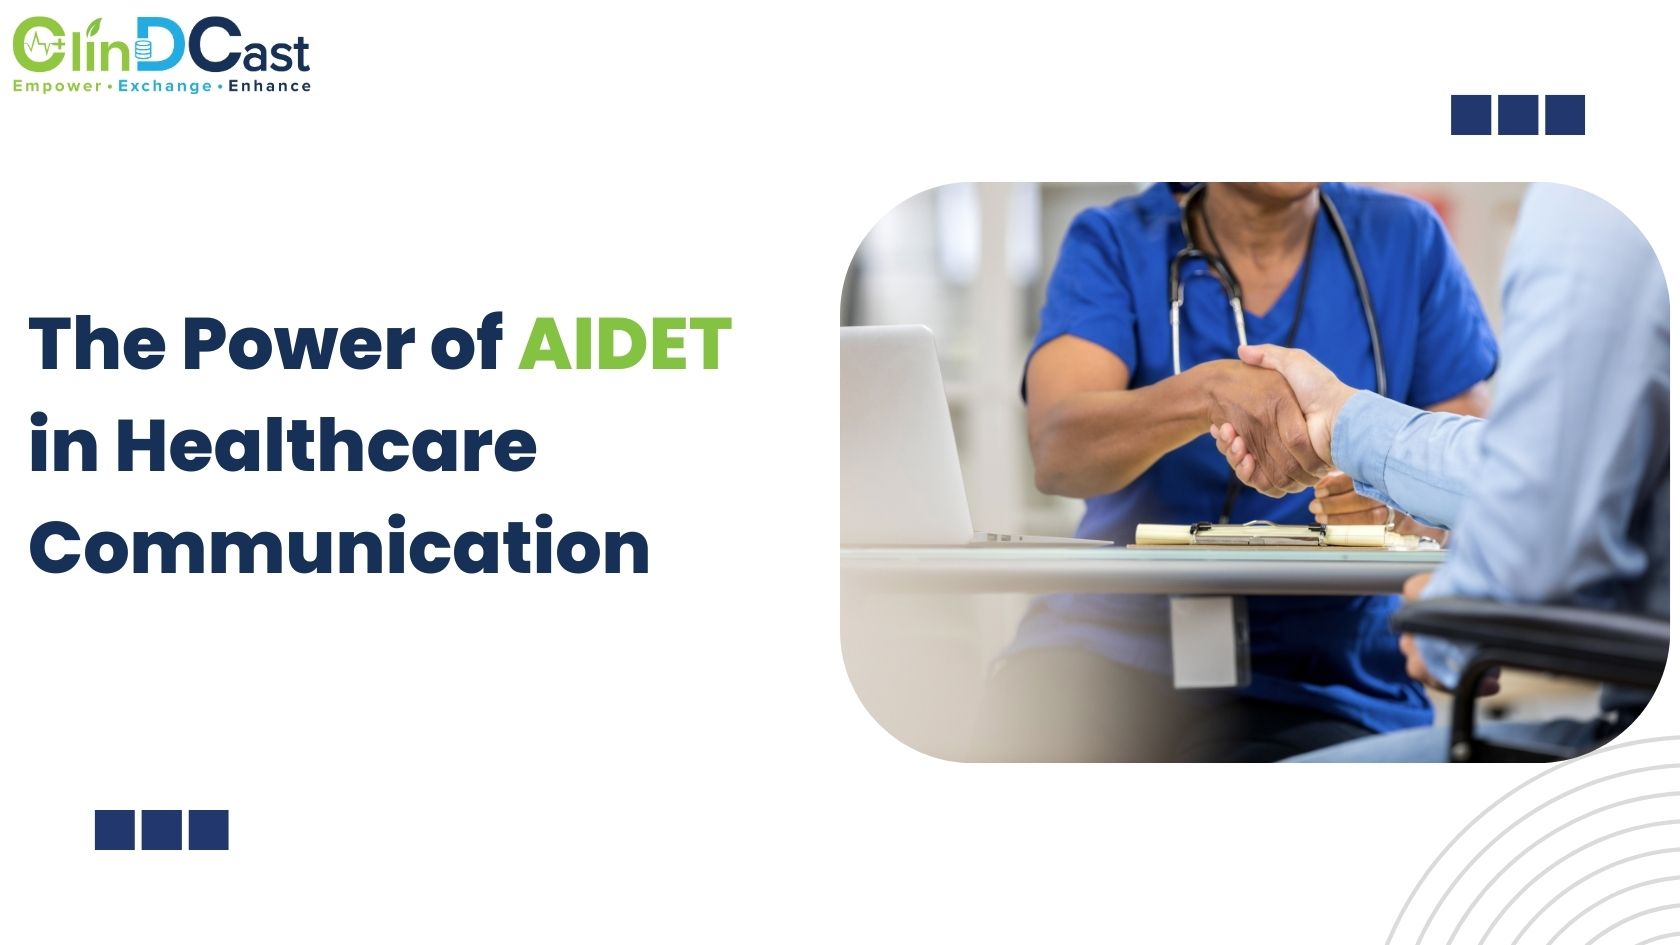 The Power of AIDET in Healthcare Communication